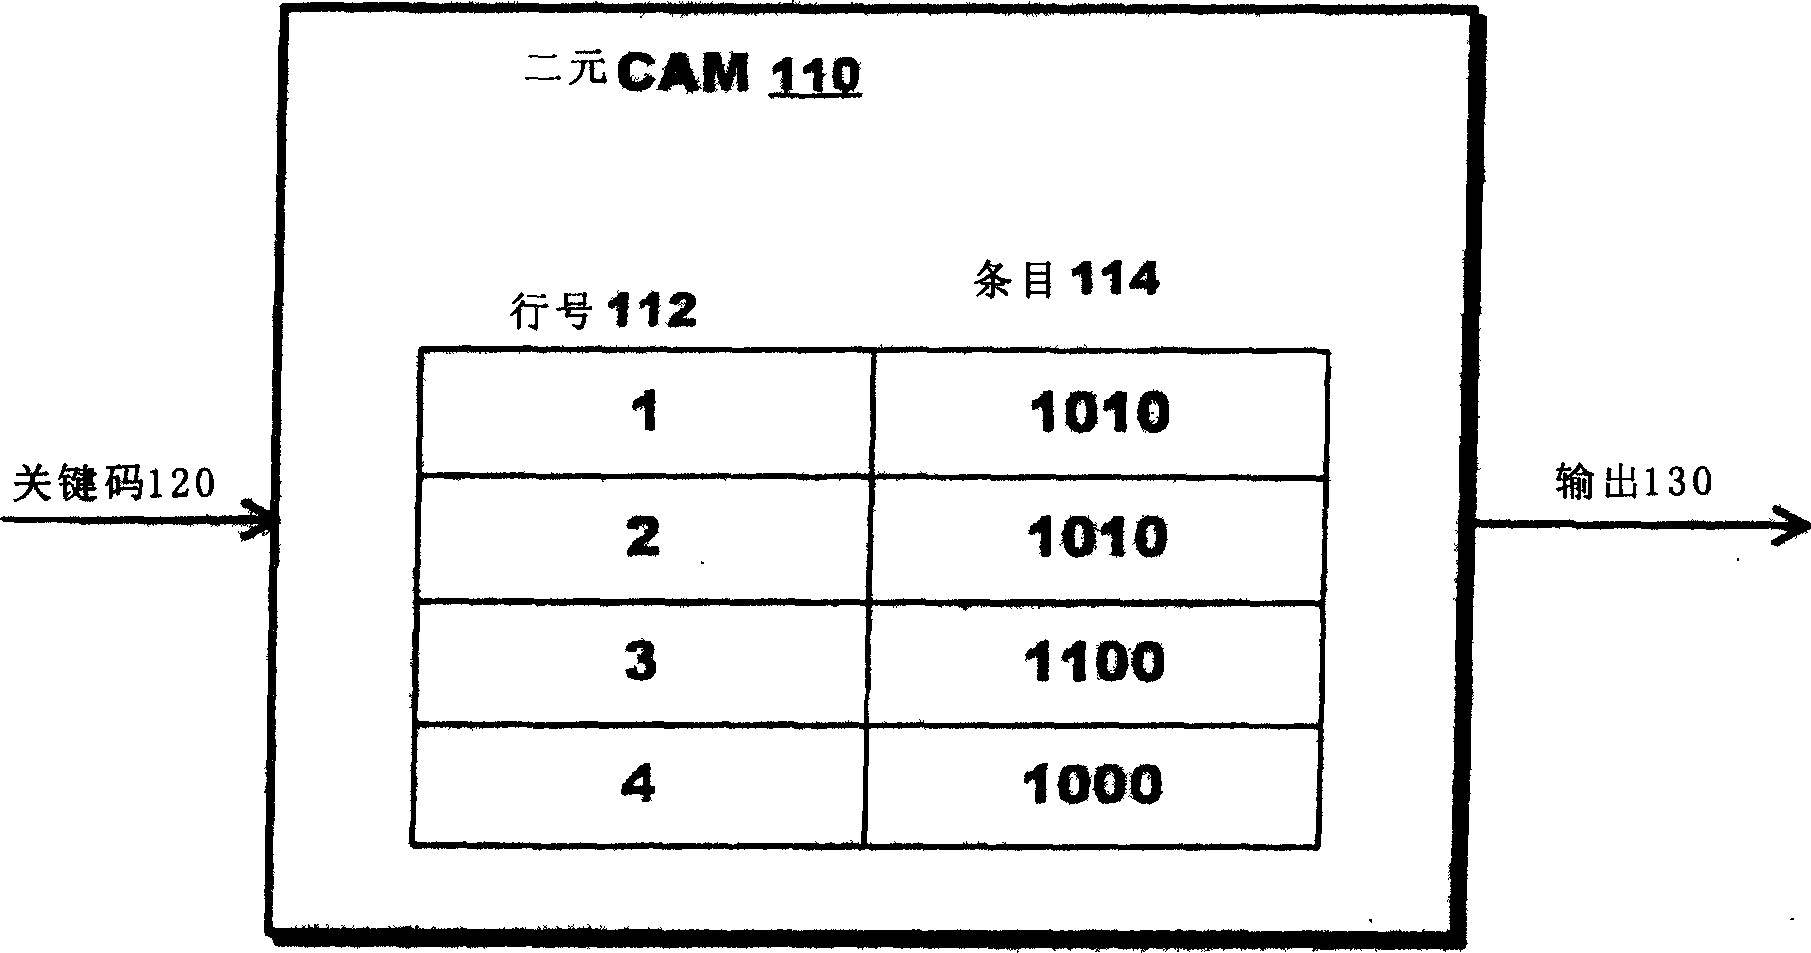 Storage system with dynamic configurable and addressable content